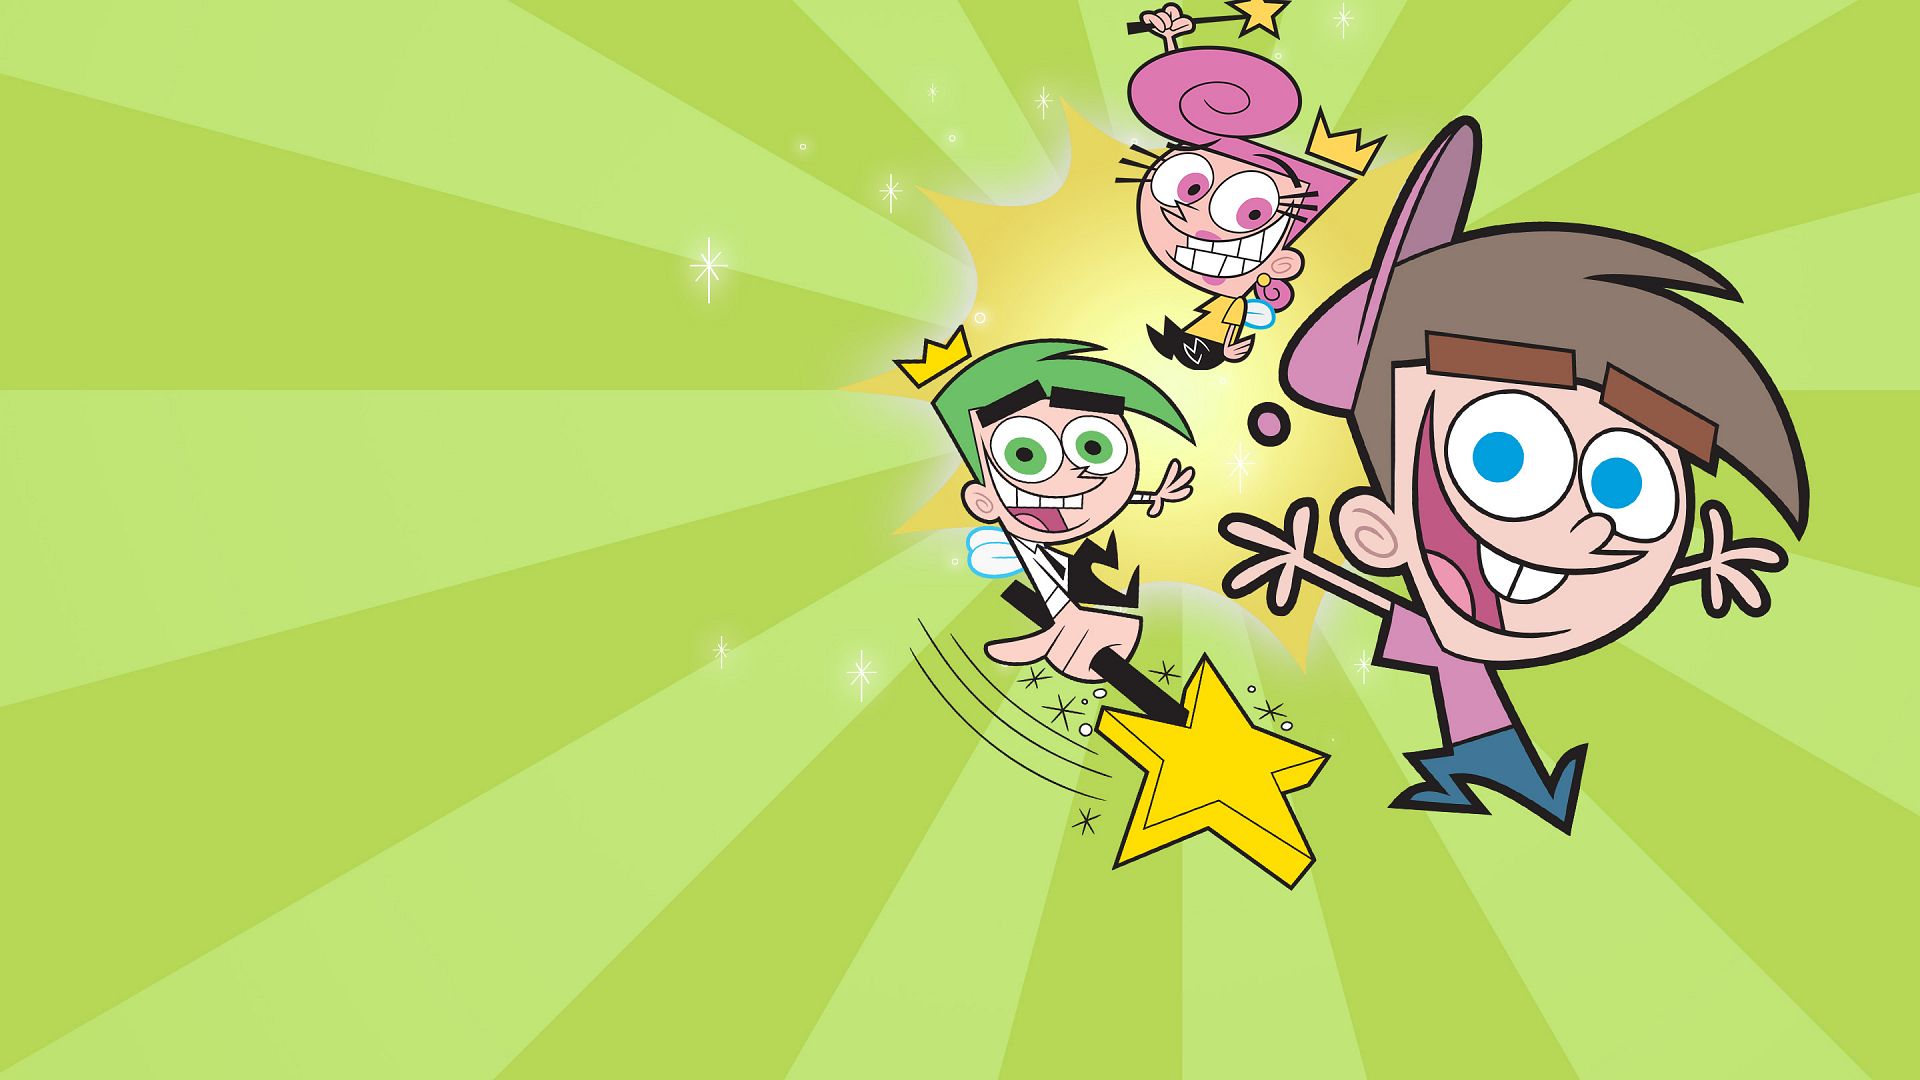 Nickelodeon Begins Production on New "The Fairly OddParents" Series for